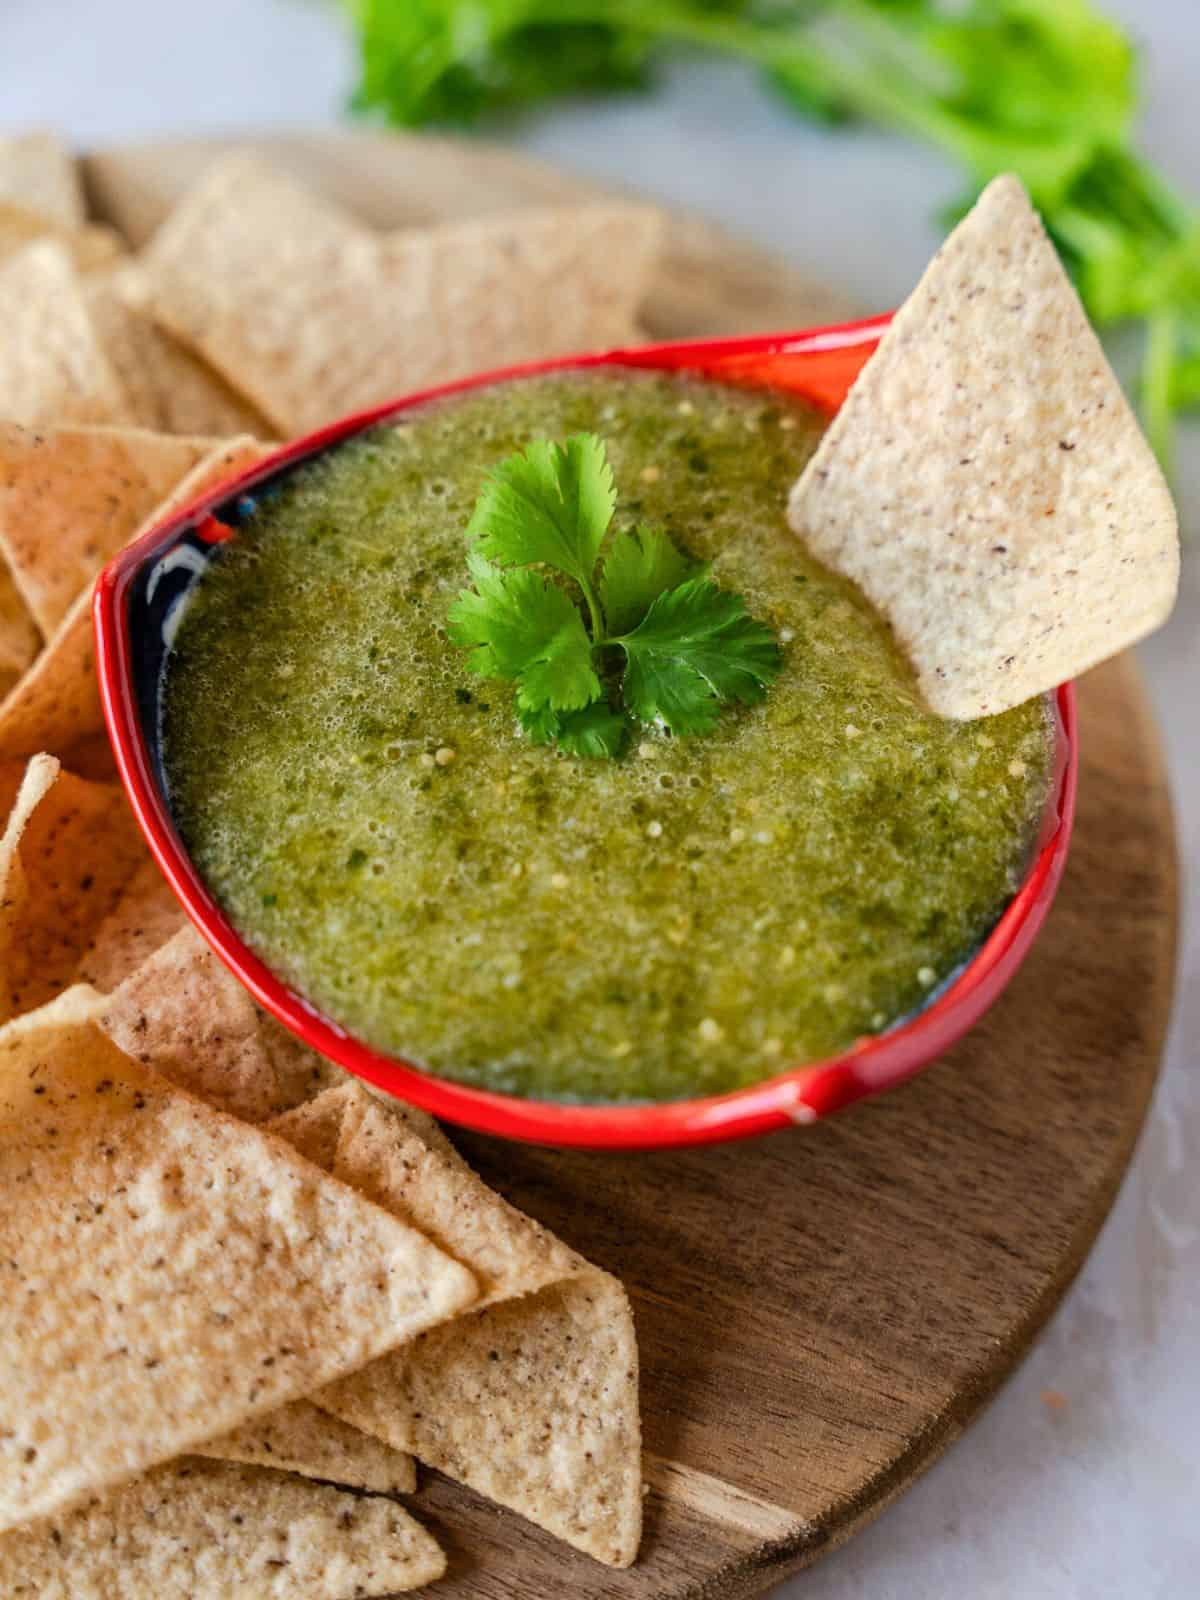 Up close view of salsa verde in a red bowl with a tortilla chip dipped in.